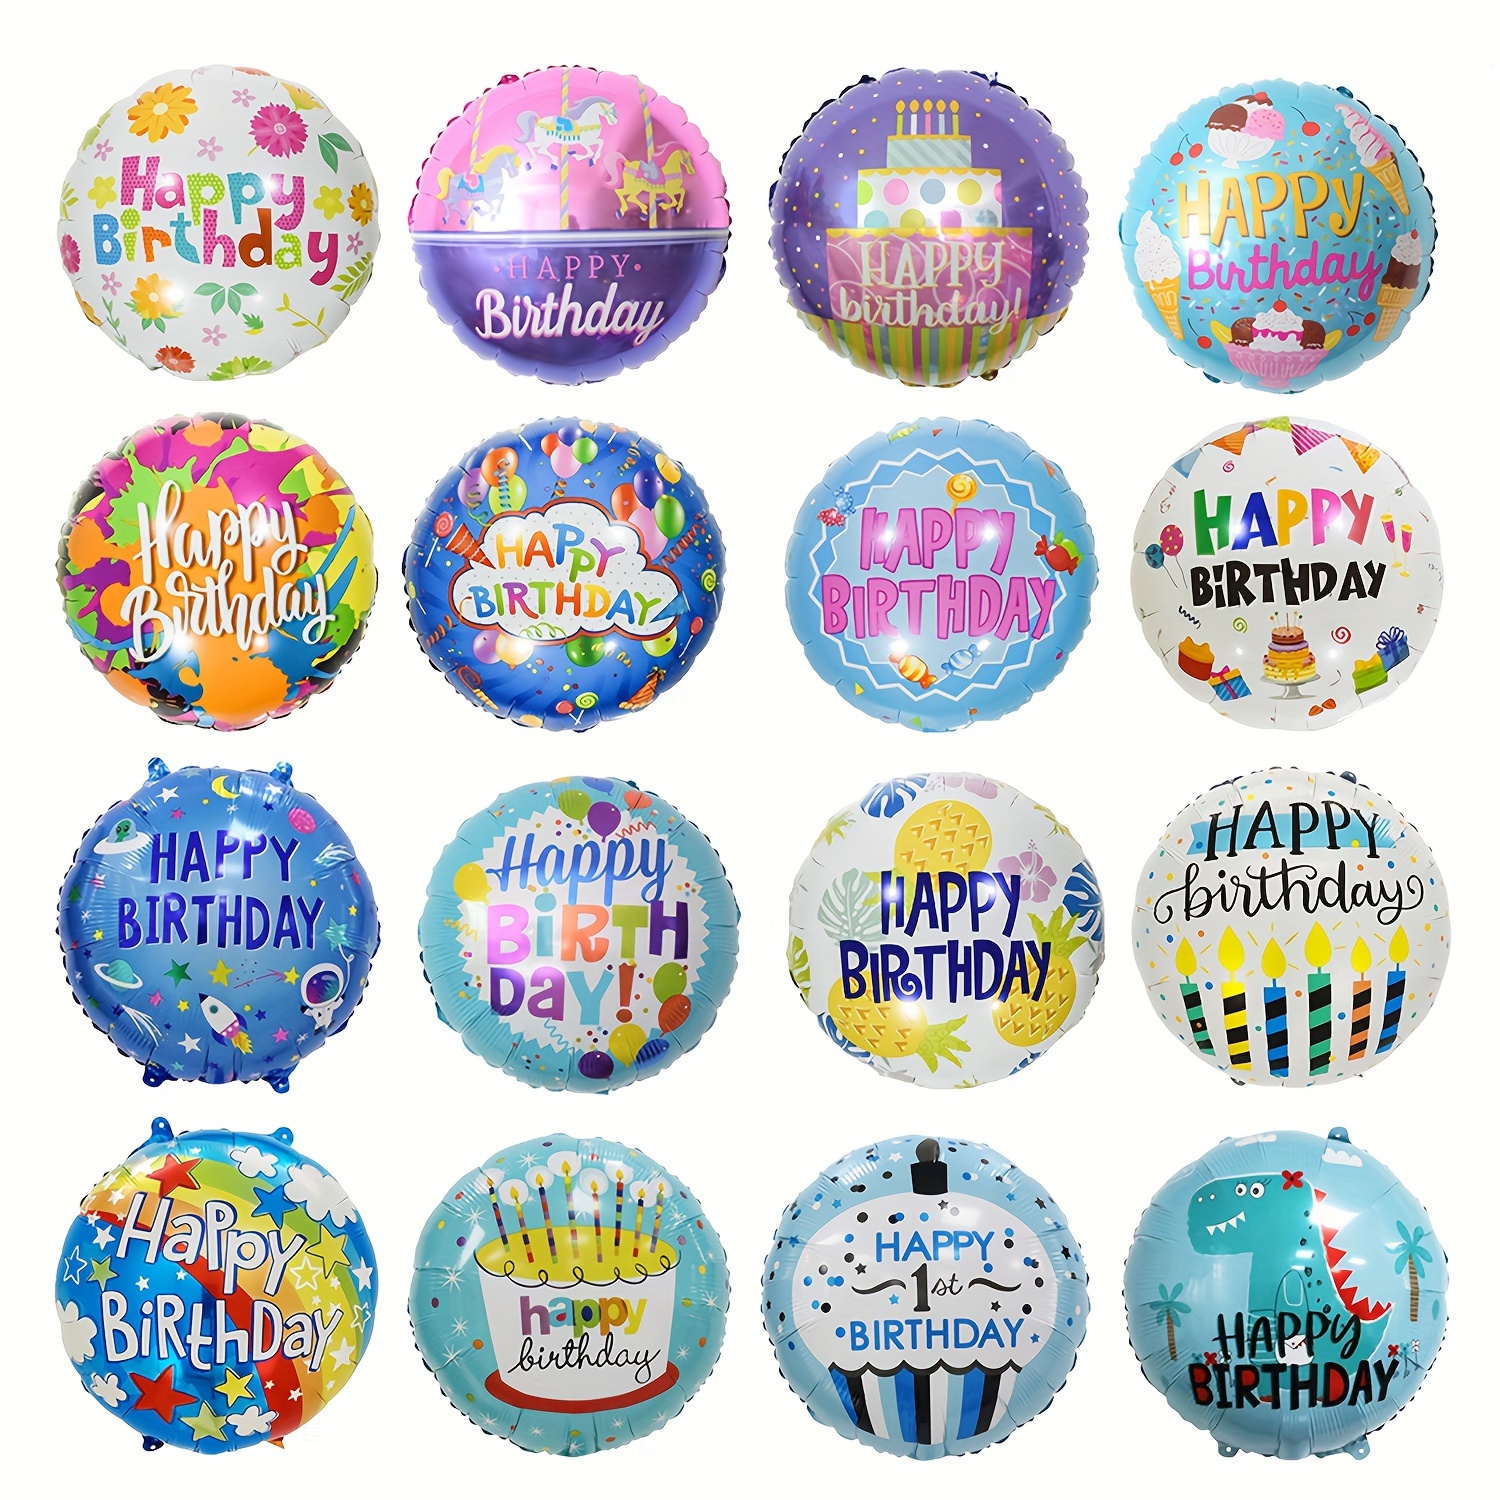 

10-pack Assorted Happy Birthday Foil Balloons - 18" Round Mylar Helium Balloons For Party Decorations, No Power Needed Birthday Balloons Happy Birthday Balloons